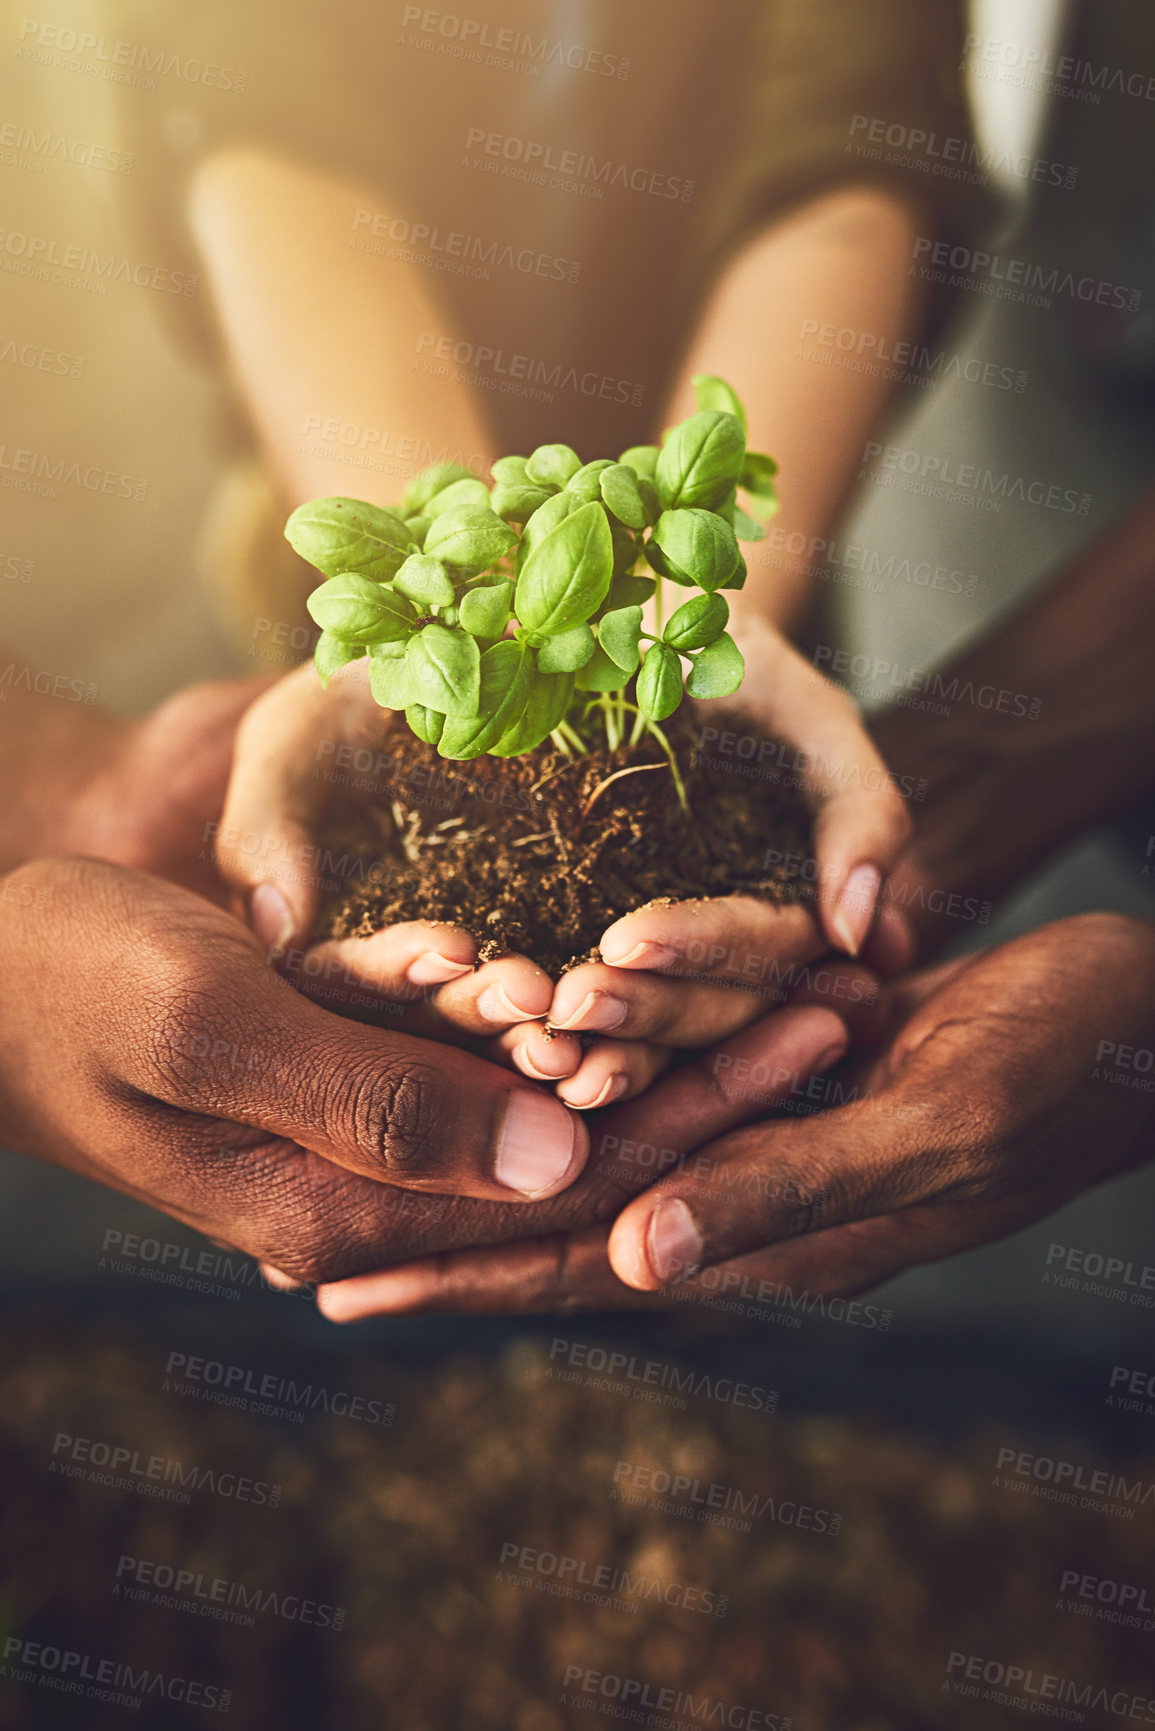 Buy stock photo Closeup shot of a group of unrecognizable people holding a plant growing out of soil